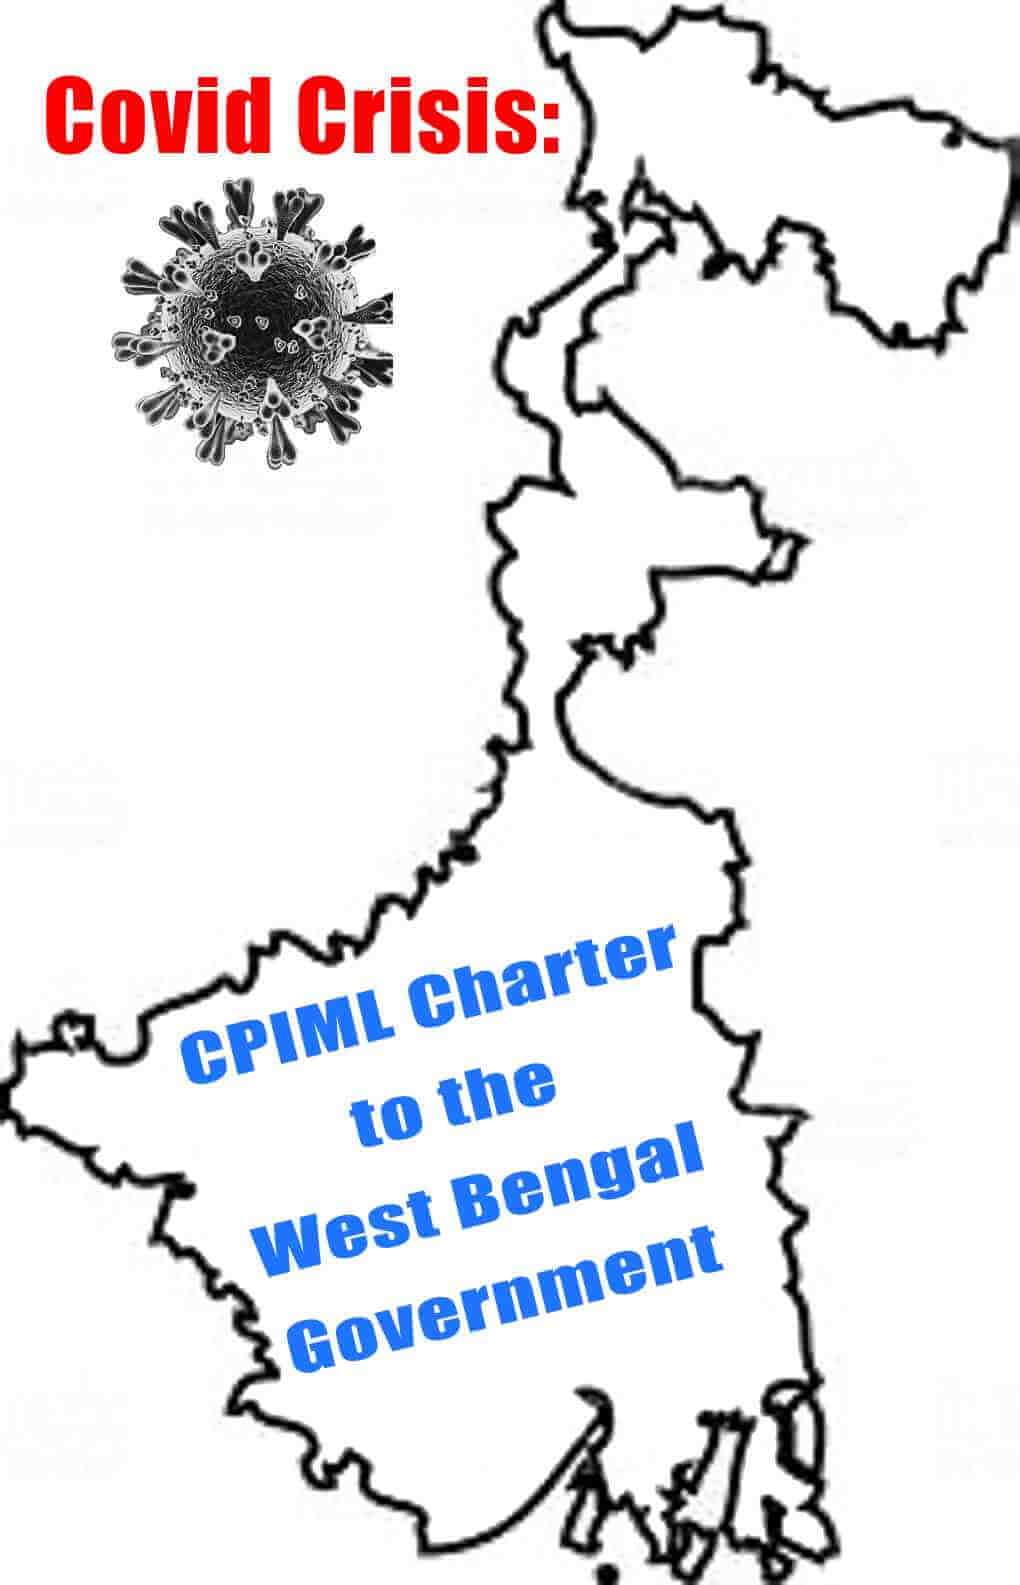 CPIML Charter to the West Bengal Govt.